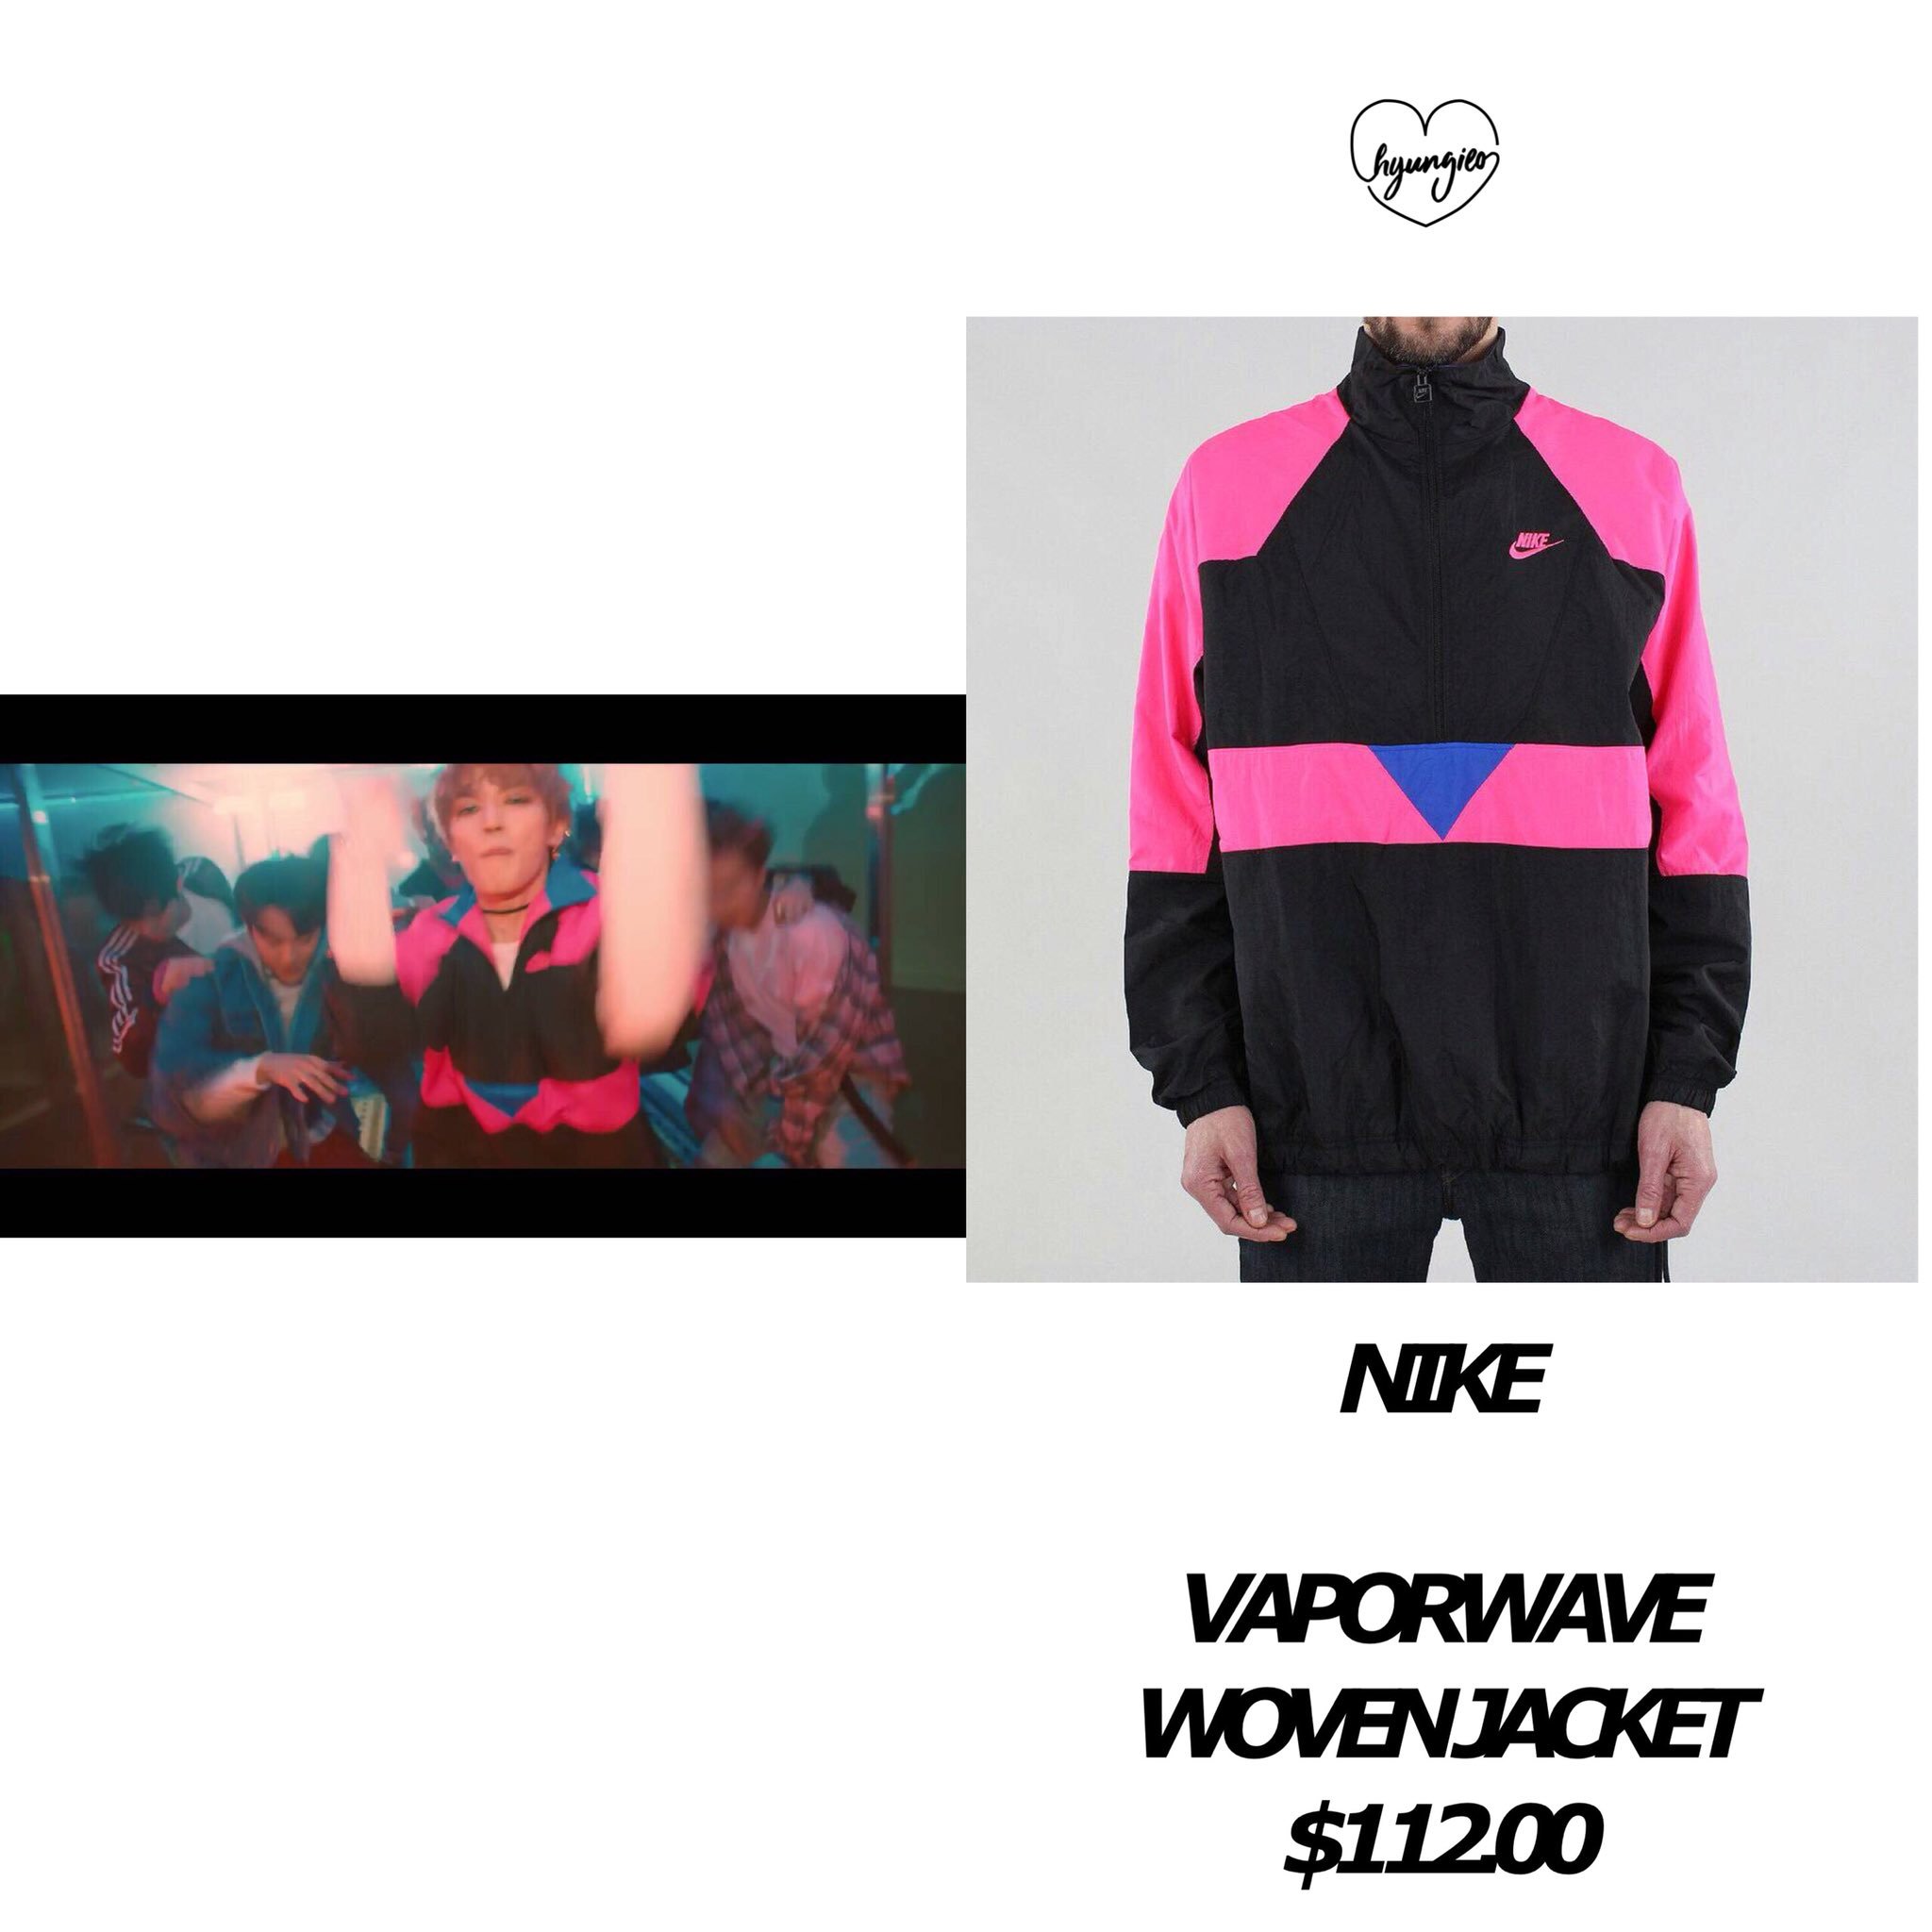 🐰 on Twitter: "180508 Taeyong Chain Music Video #Taeyong wearing NIKE  VAPORWAVE WOVEN JACKET $112.00 #NCT127 #CHAIN #엔시티127 #태용  https://t.co/7s0SbW9bv2" / Twitter